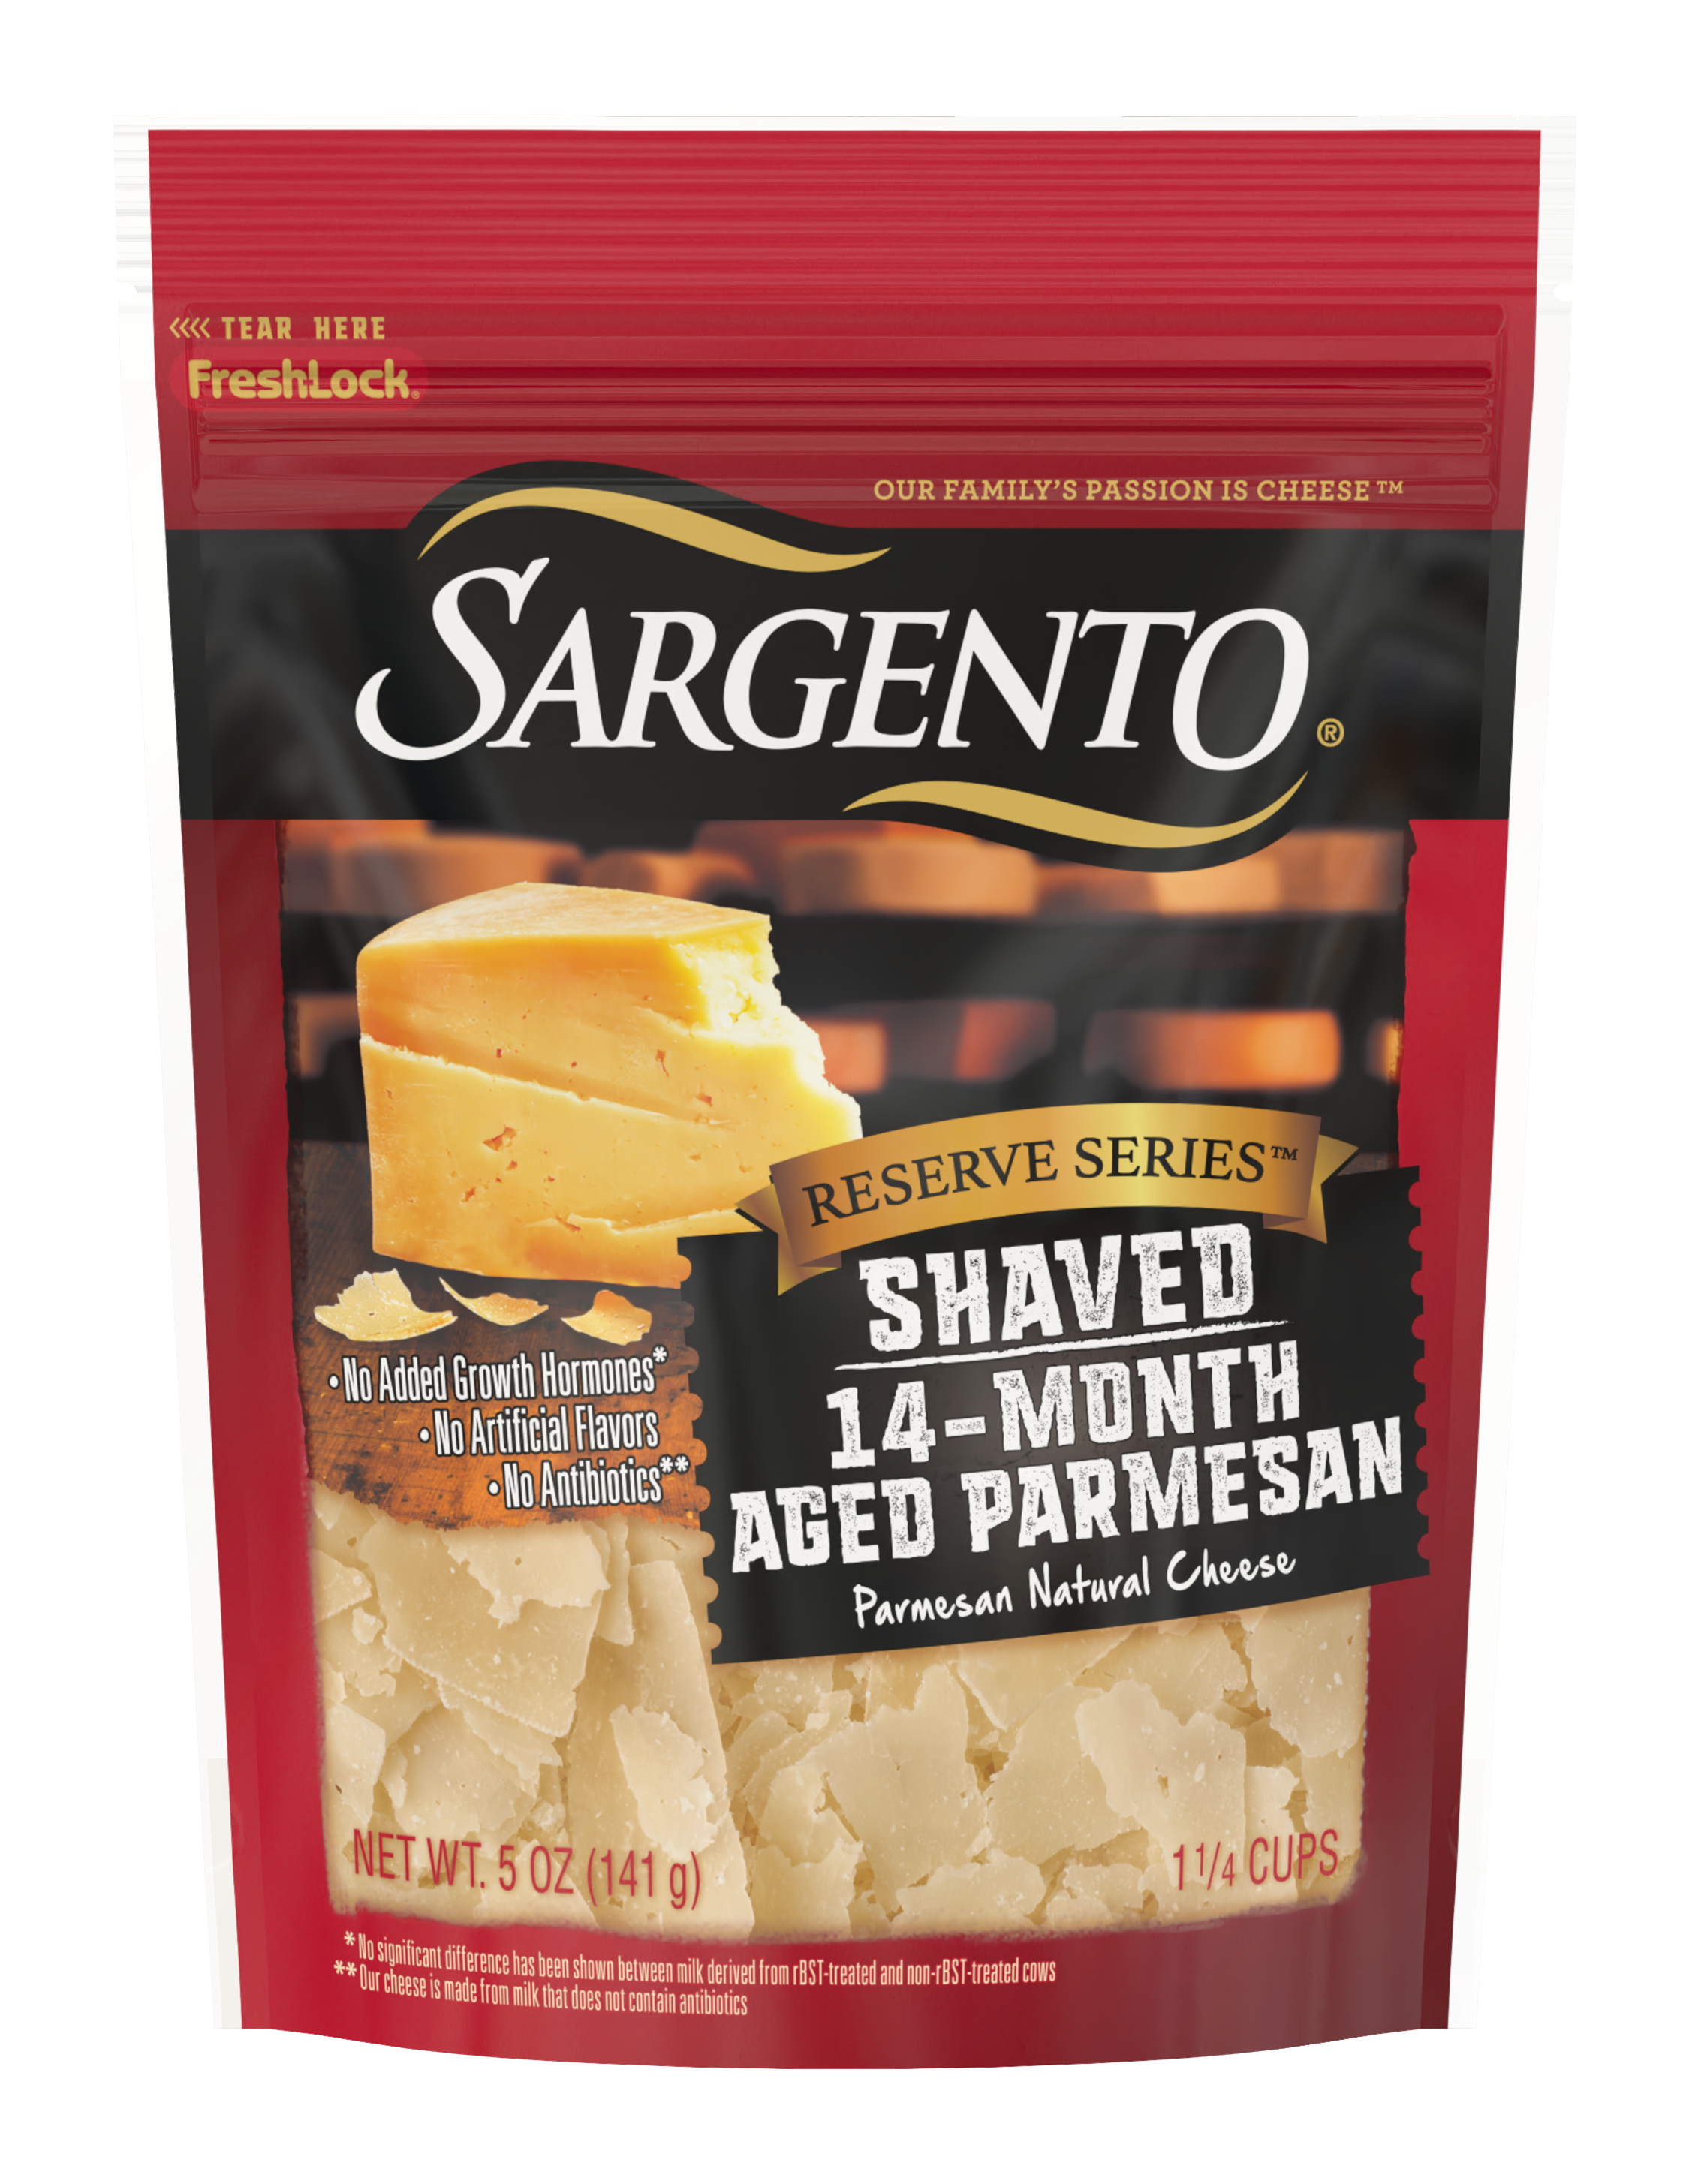 Sargento® Reserve Series™ Shaved 14-Month Aged Parmesan Natural Cheese